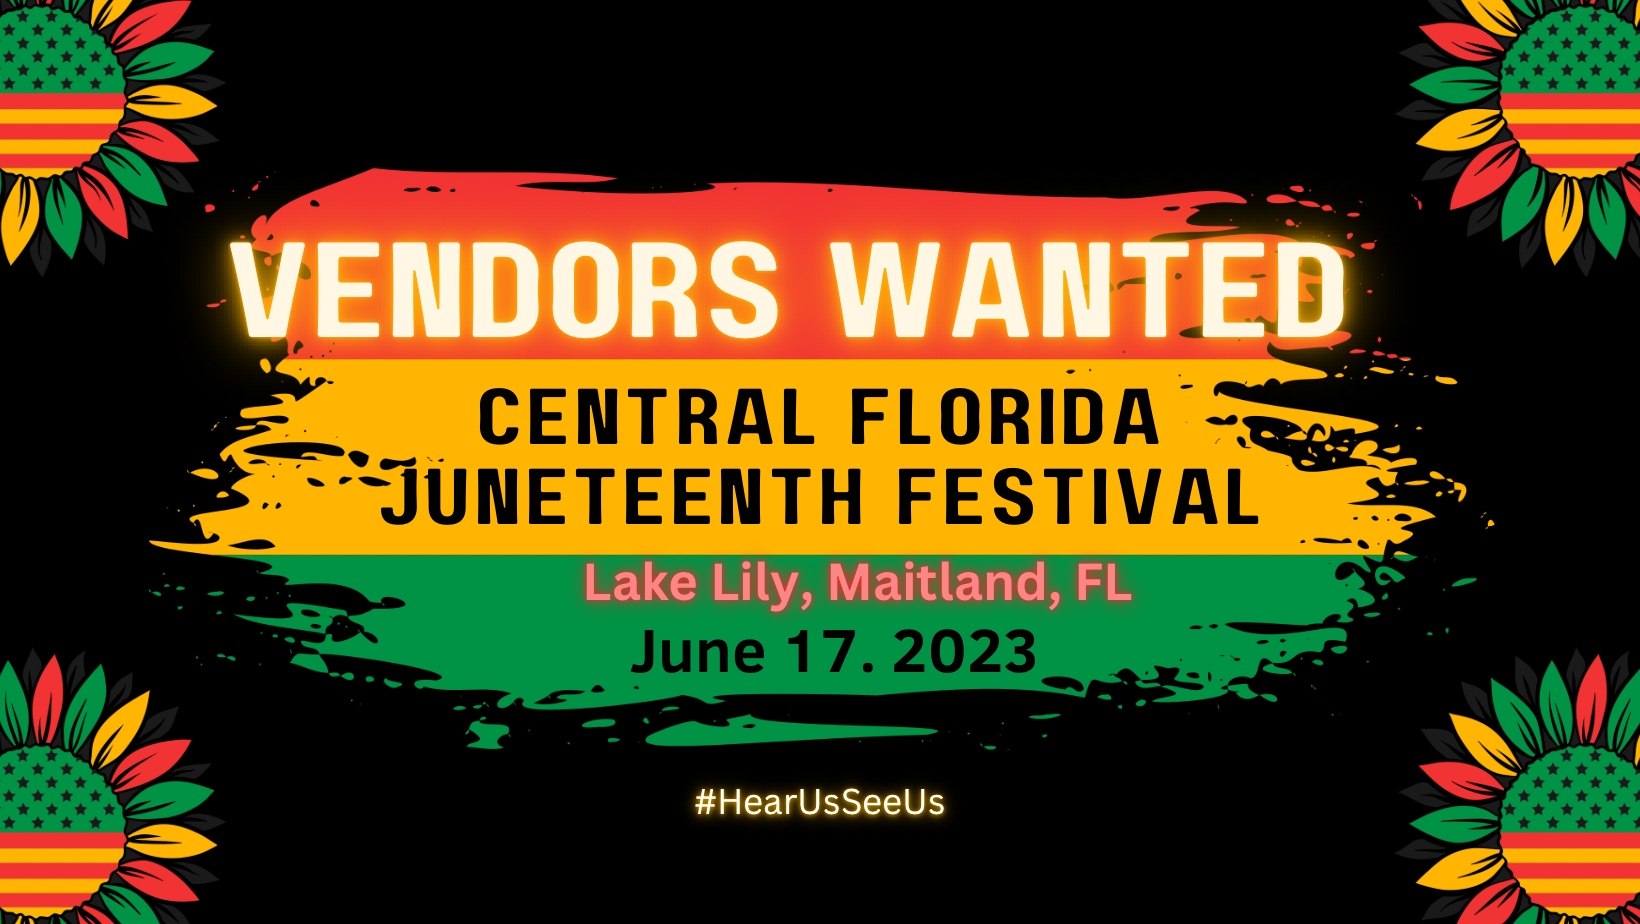 VENDORS WANTED for the Central Florida Juneteenth Celebration and Festival of Arts for cover image